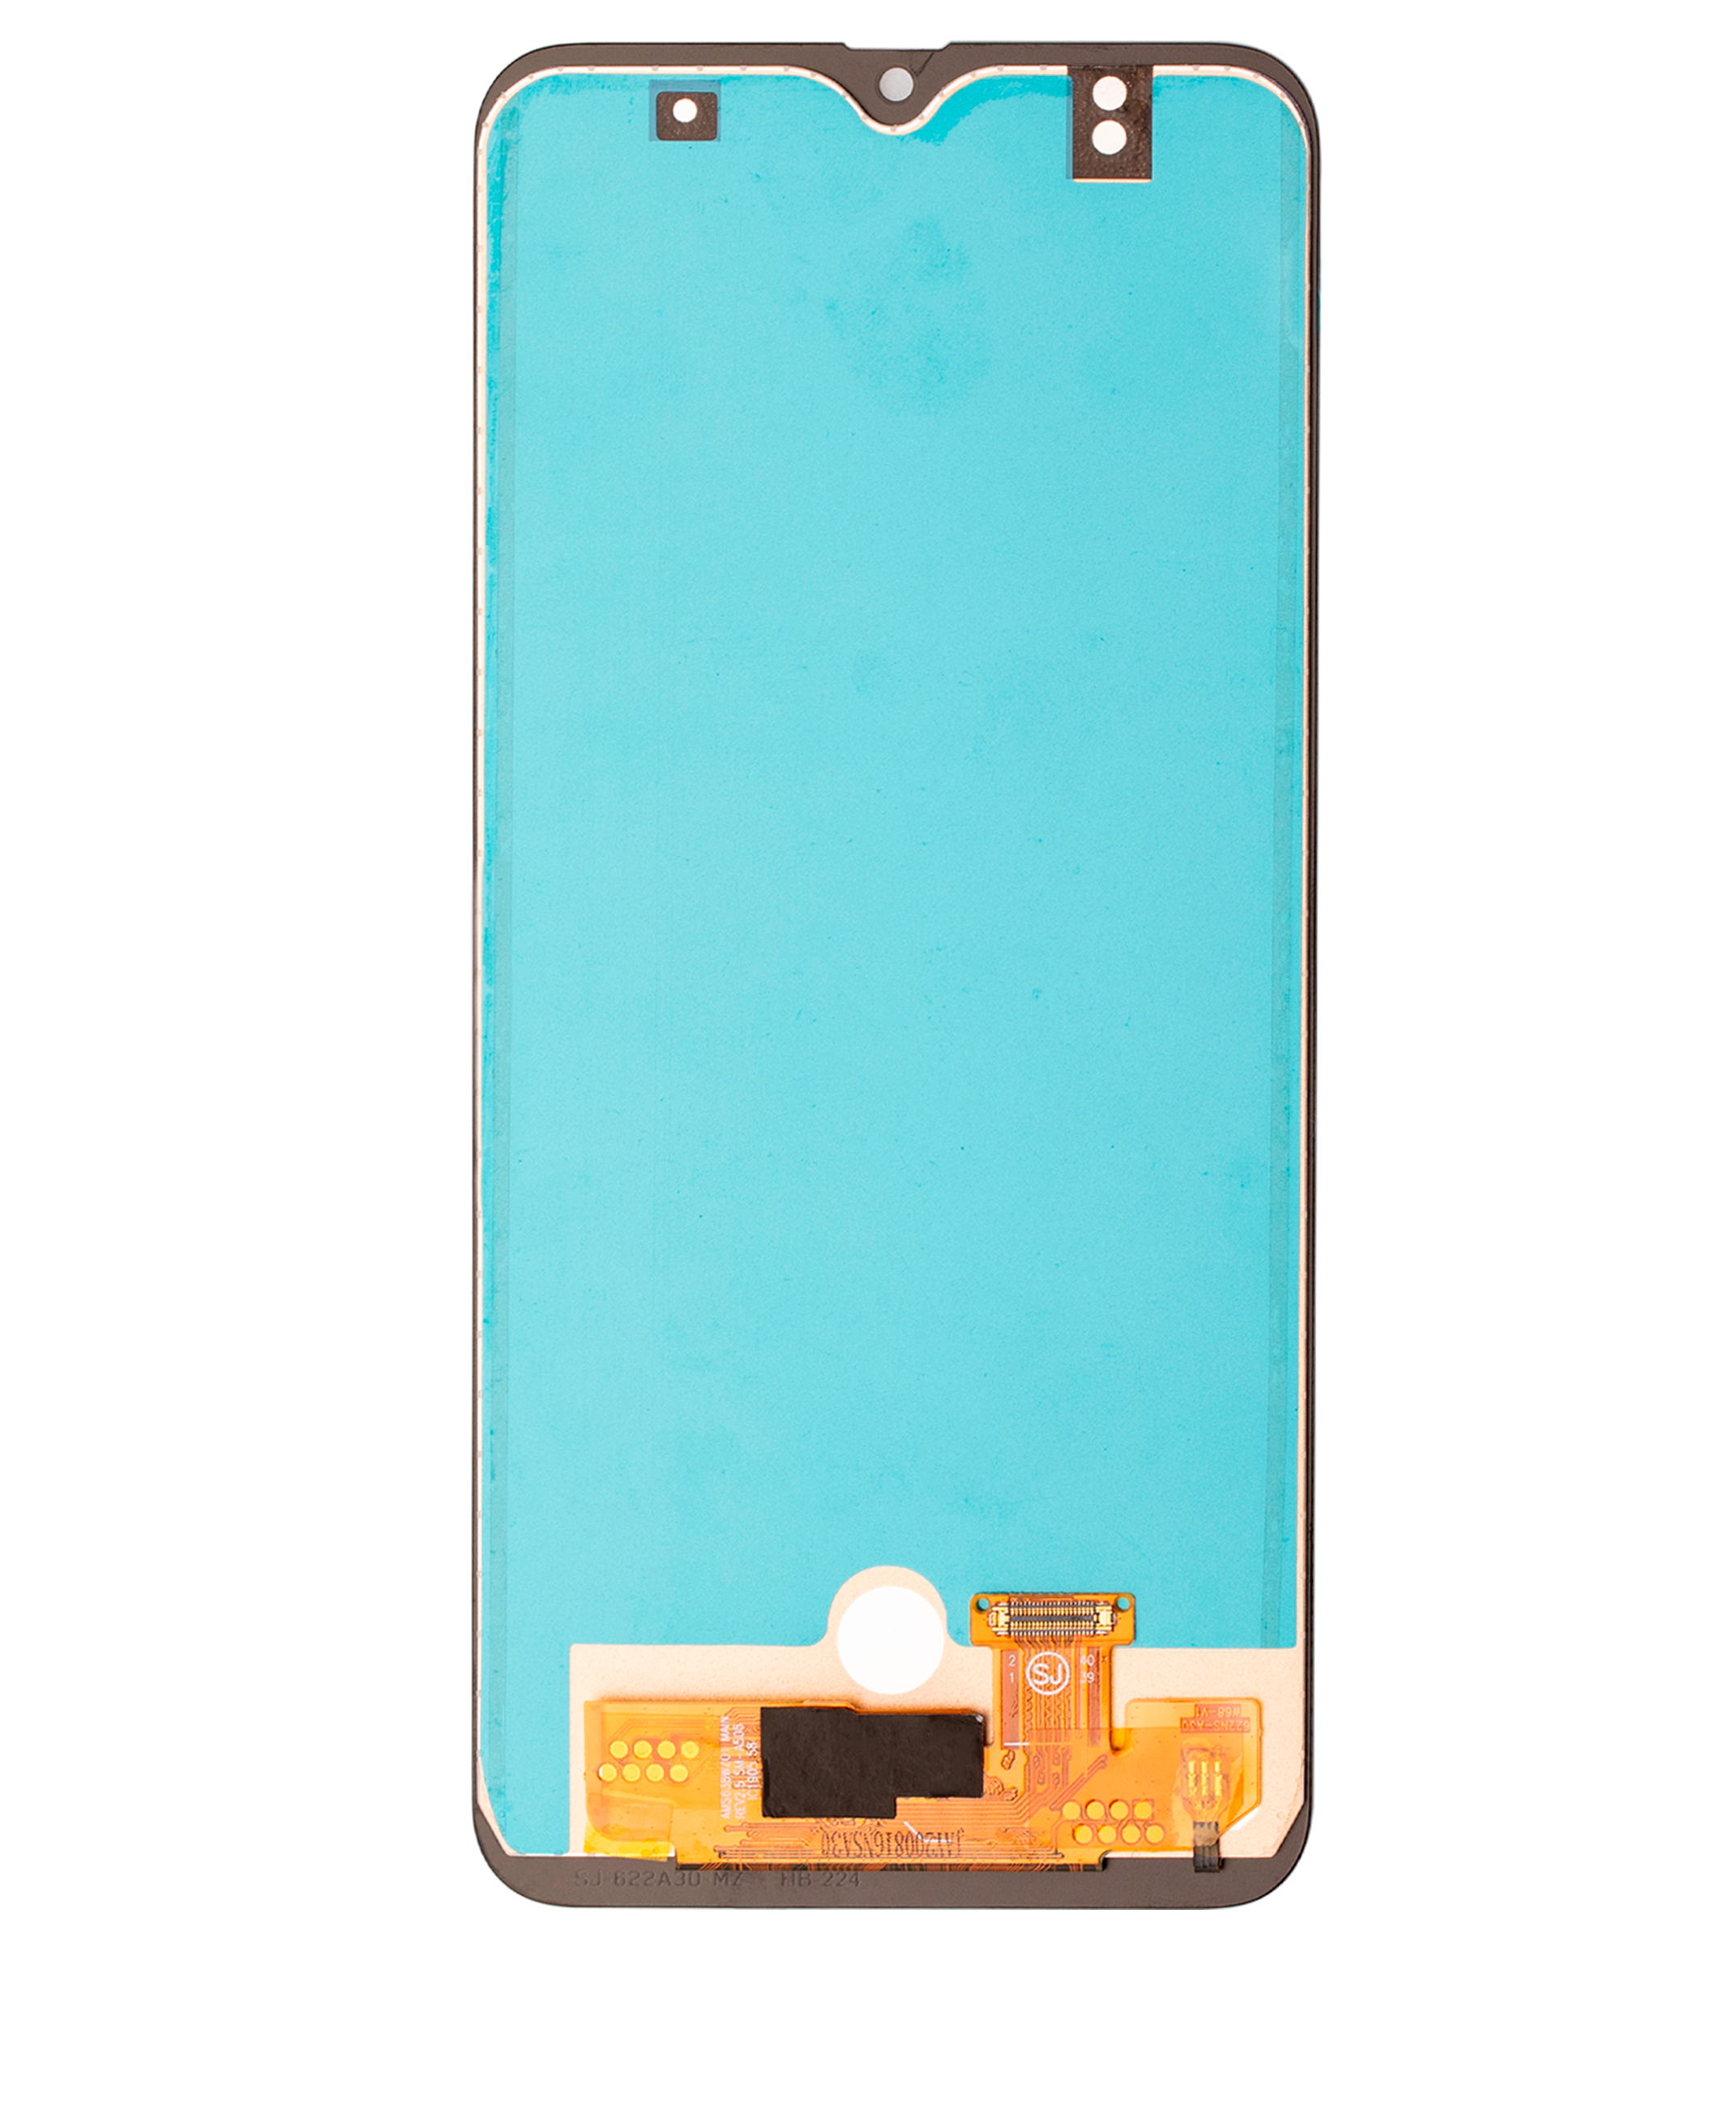 For Samsung Galaxy A50S (A507 / 2019) LCD Screen Replacement Without Frame (Aftermarket Pro) (All Colors)